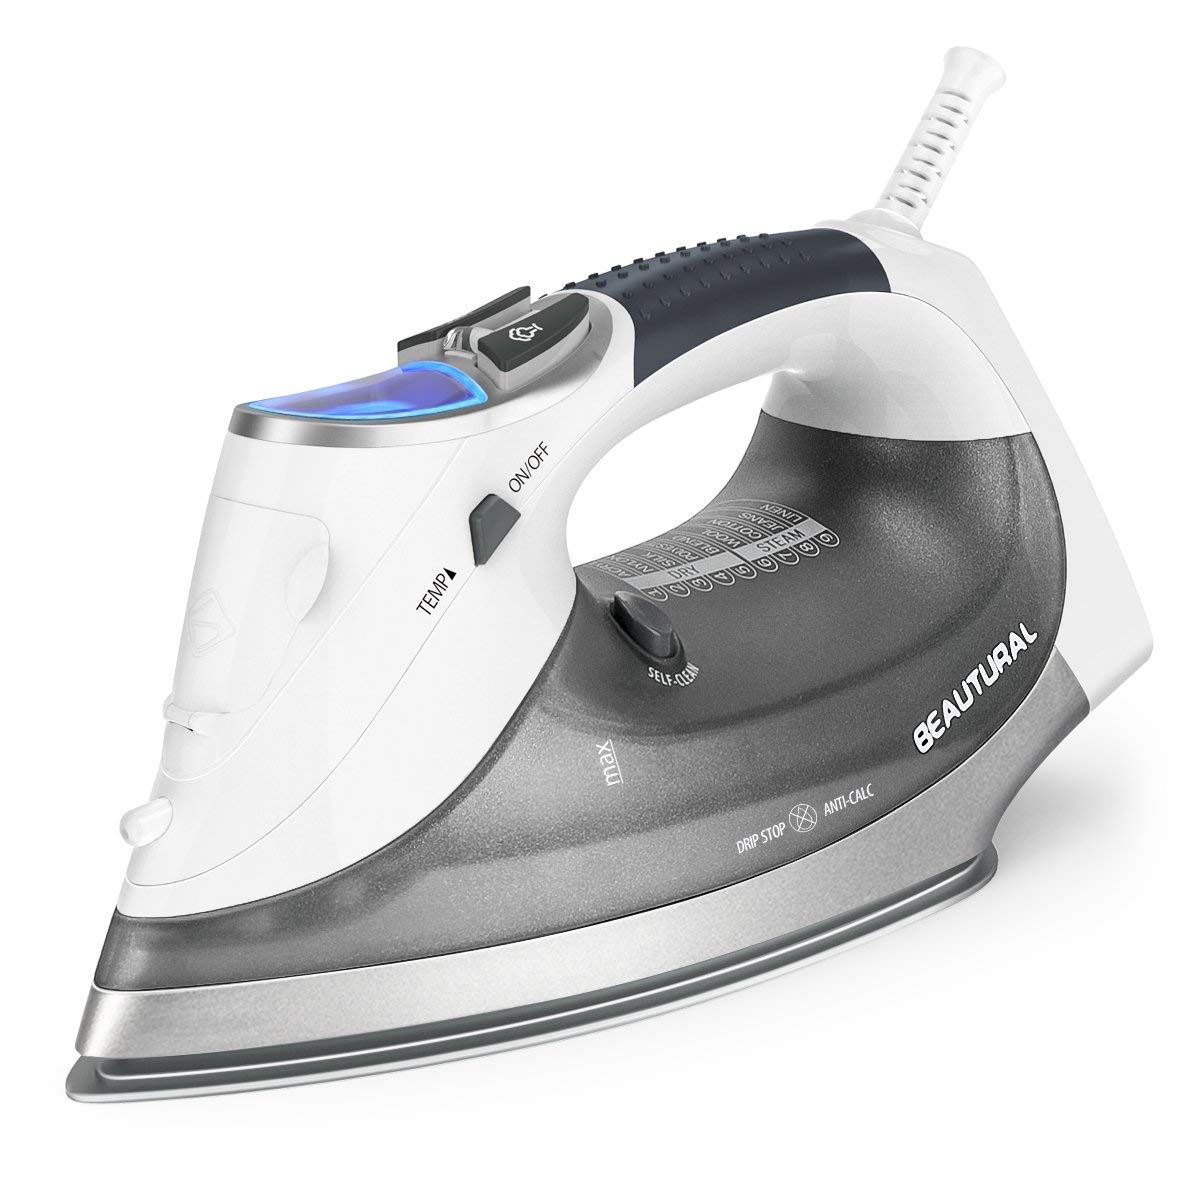 C Hand Held Steam Iron - Party Rentals NYC | New York Party Rentals LLC